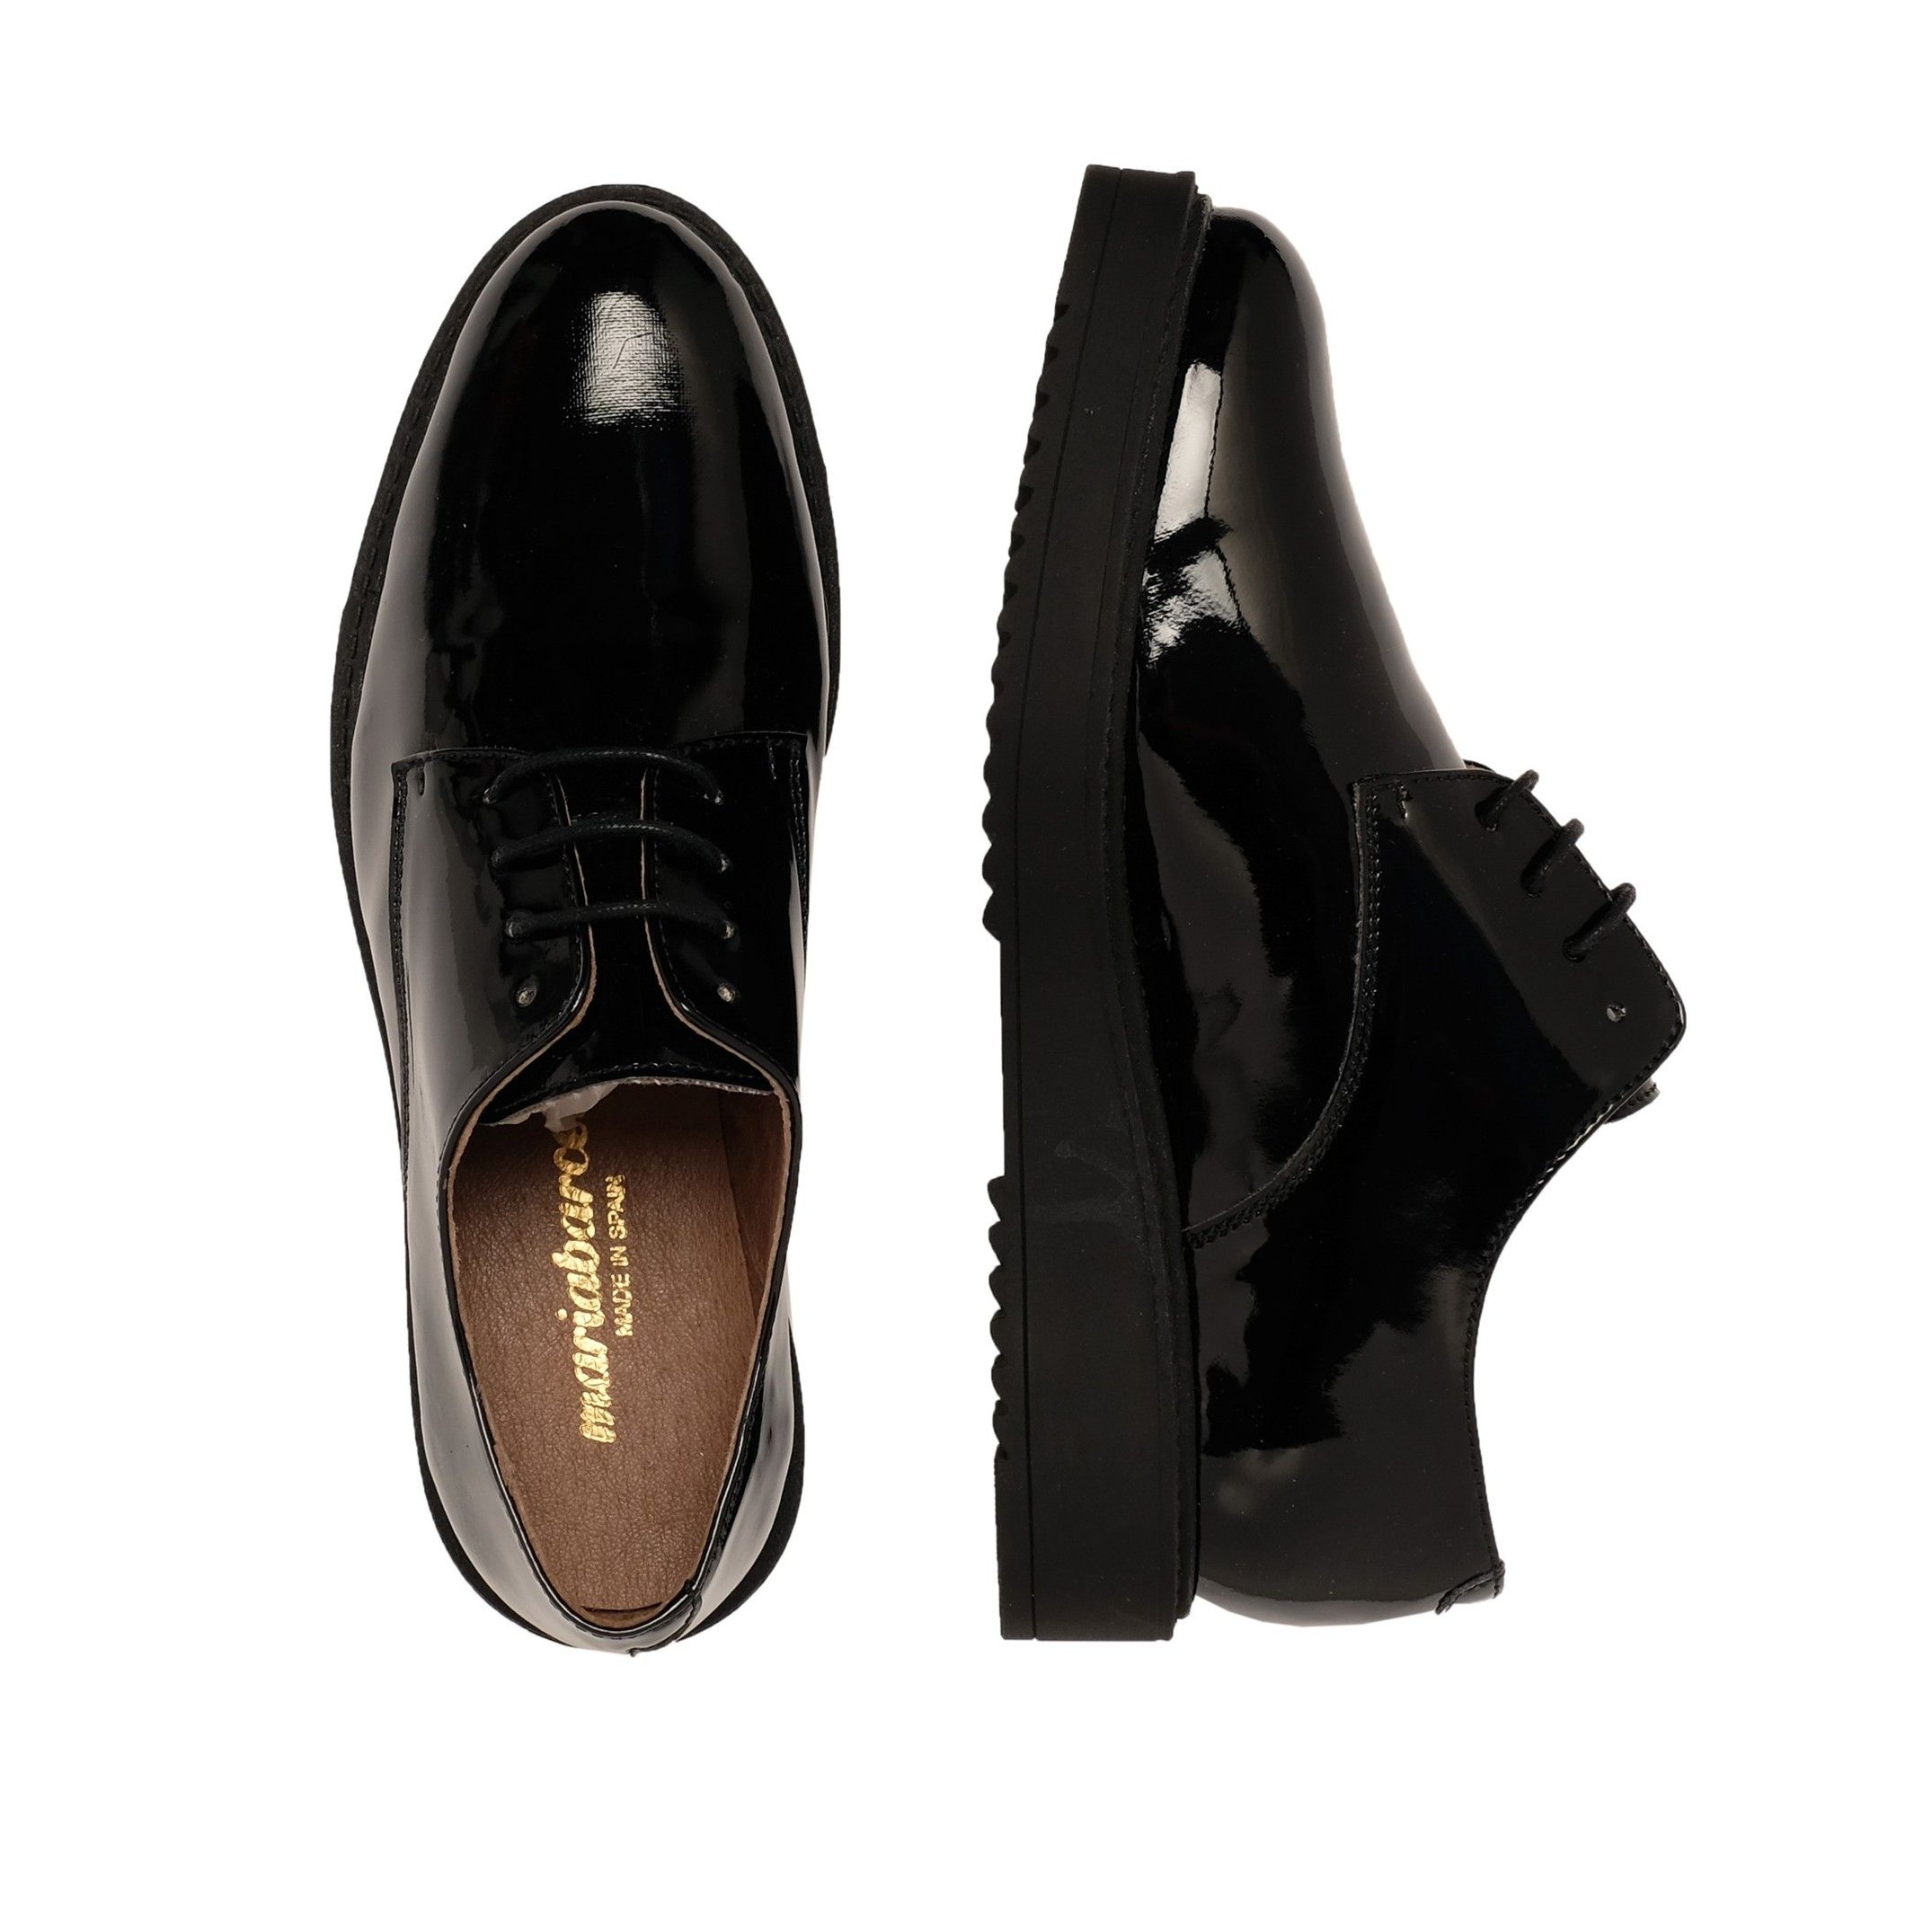 Blucher shoes to dress with laces closure for women. Patent leather. Inner made of leather. Rubber sole. Made in Spain.